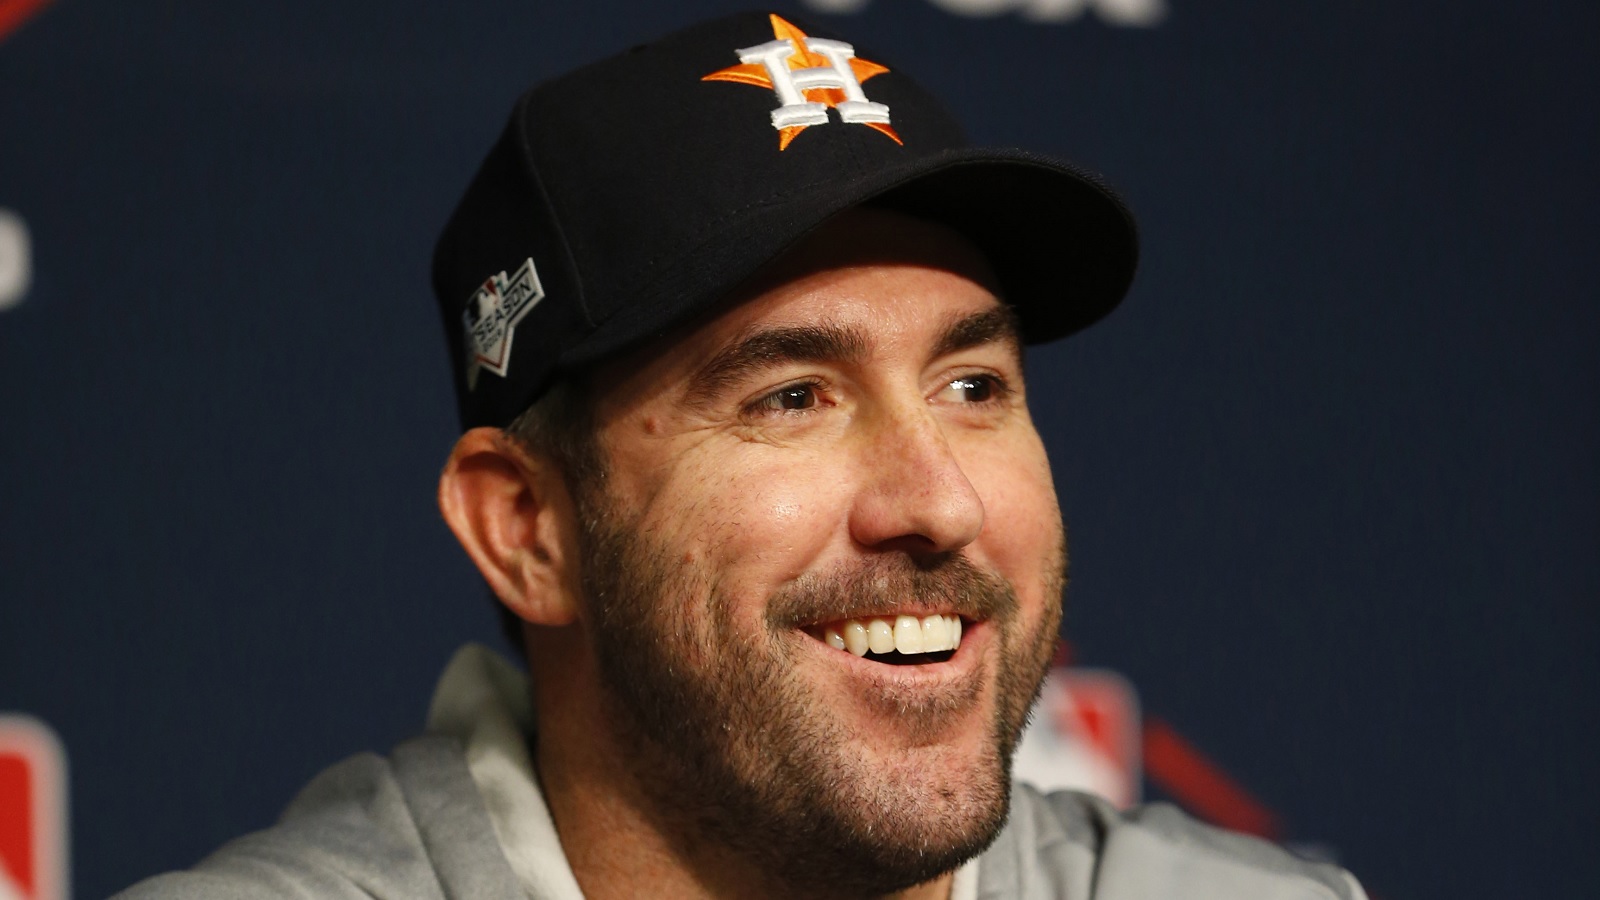 Verlander flips script, gives thumbs-up to Phillies fans